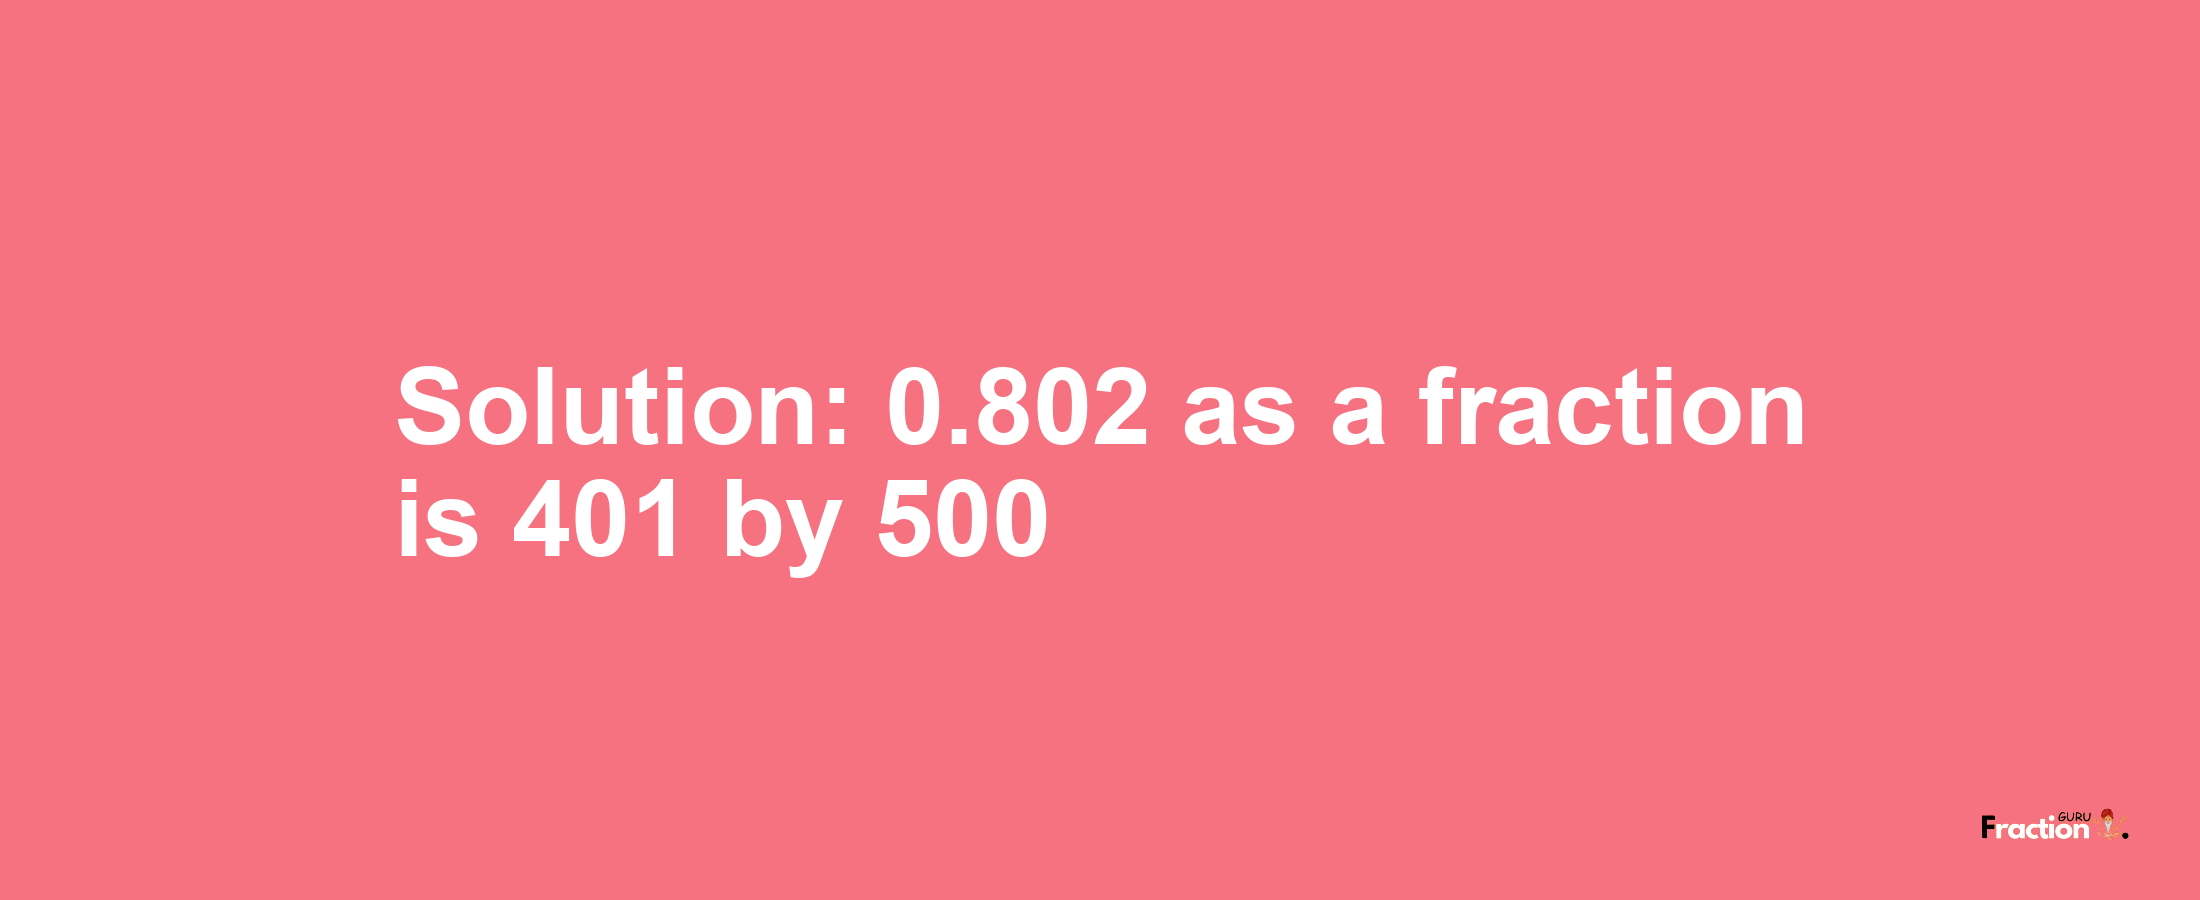 Solution:0.802 as a fraction is 401/500